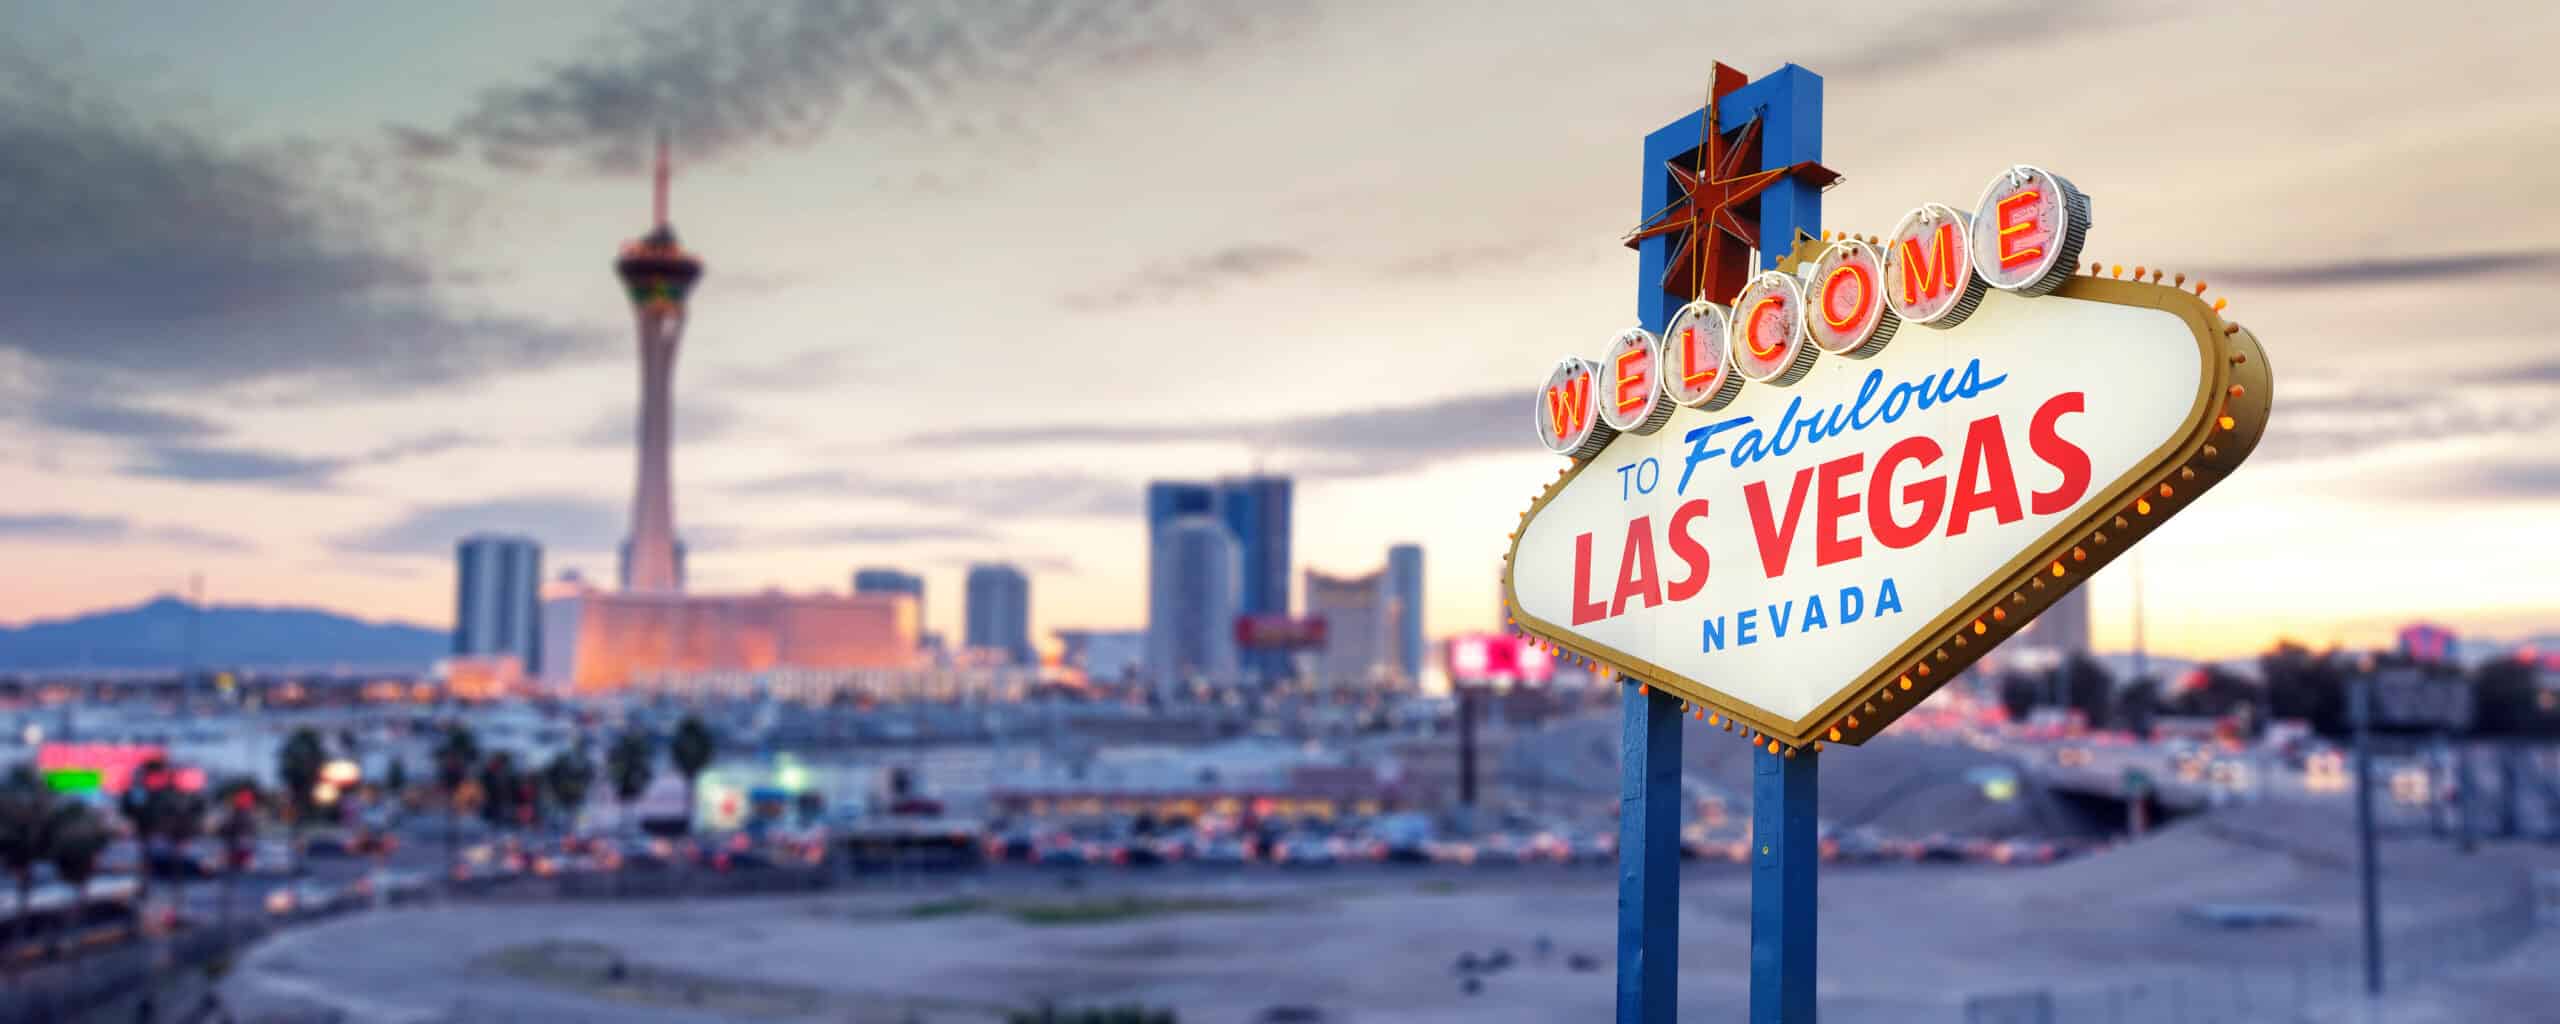 Iconic Welcome to Las Vegas sign at dusk